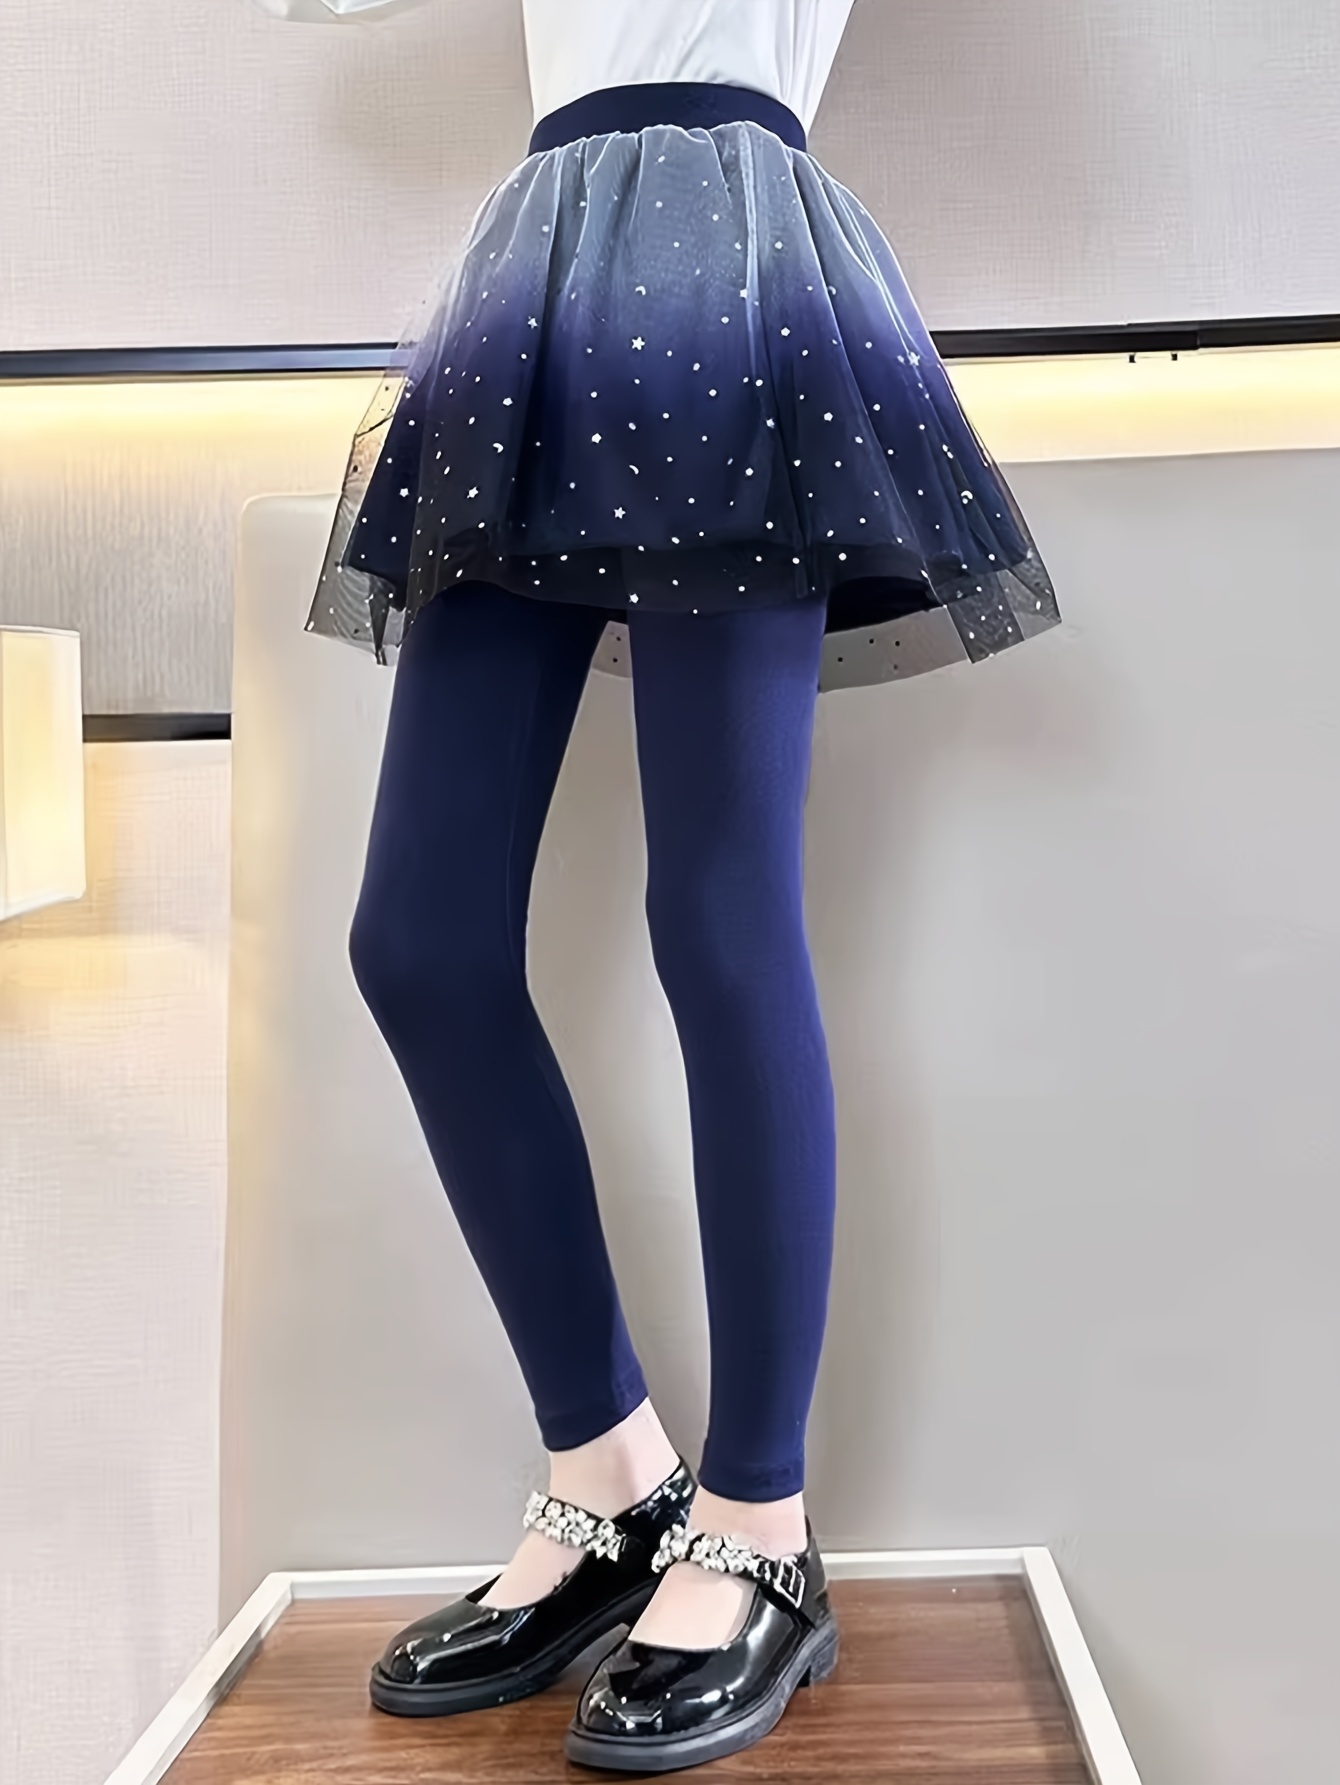 Skirted Leggings For Girls Stylish Long Trousers For Teens And Kids 4 14  Years LJ201019 From Jiao08, $10.91